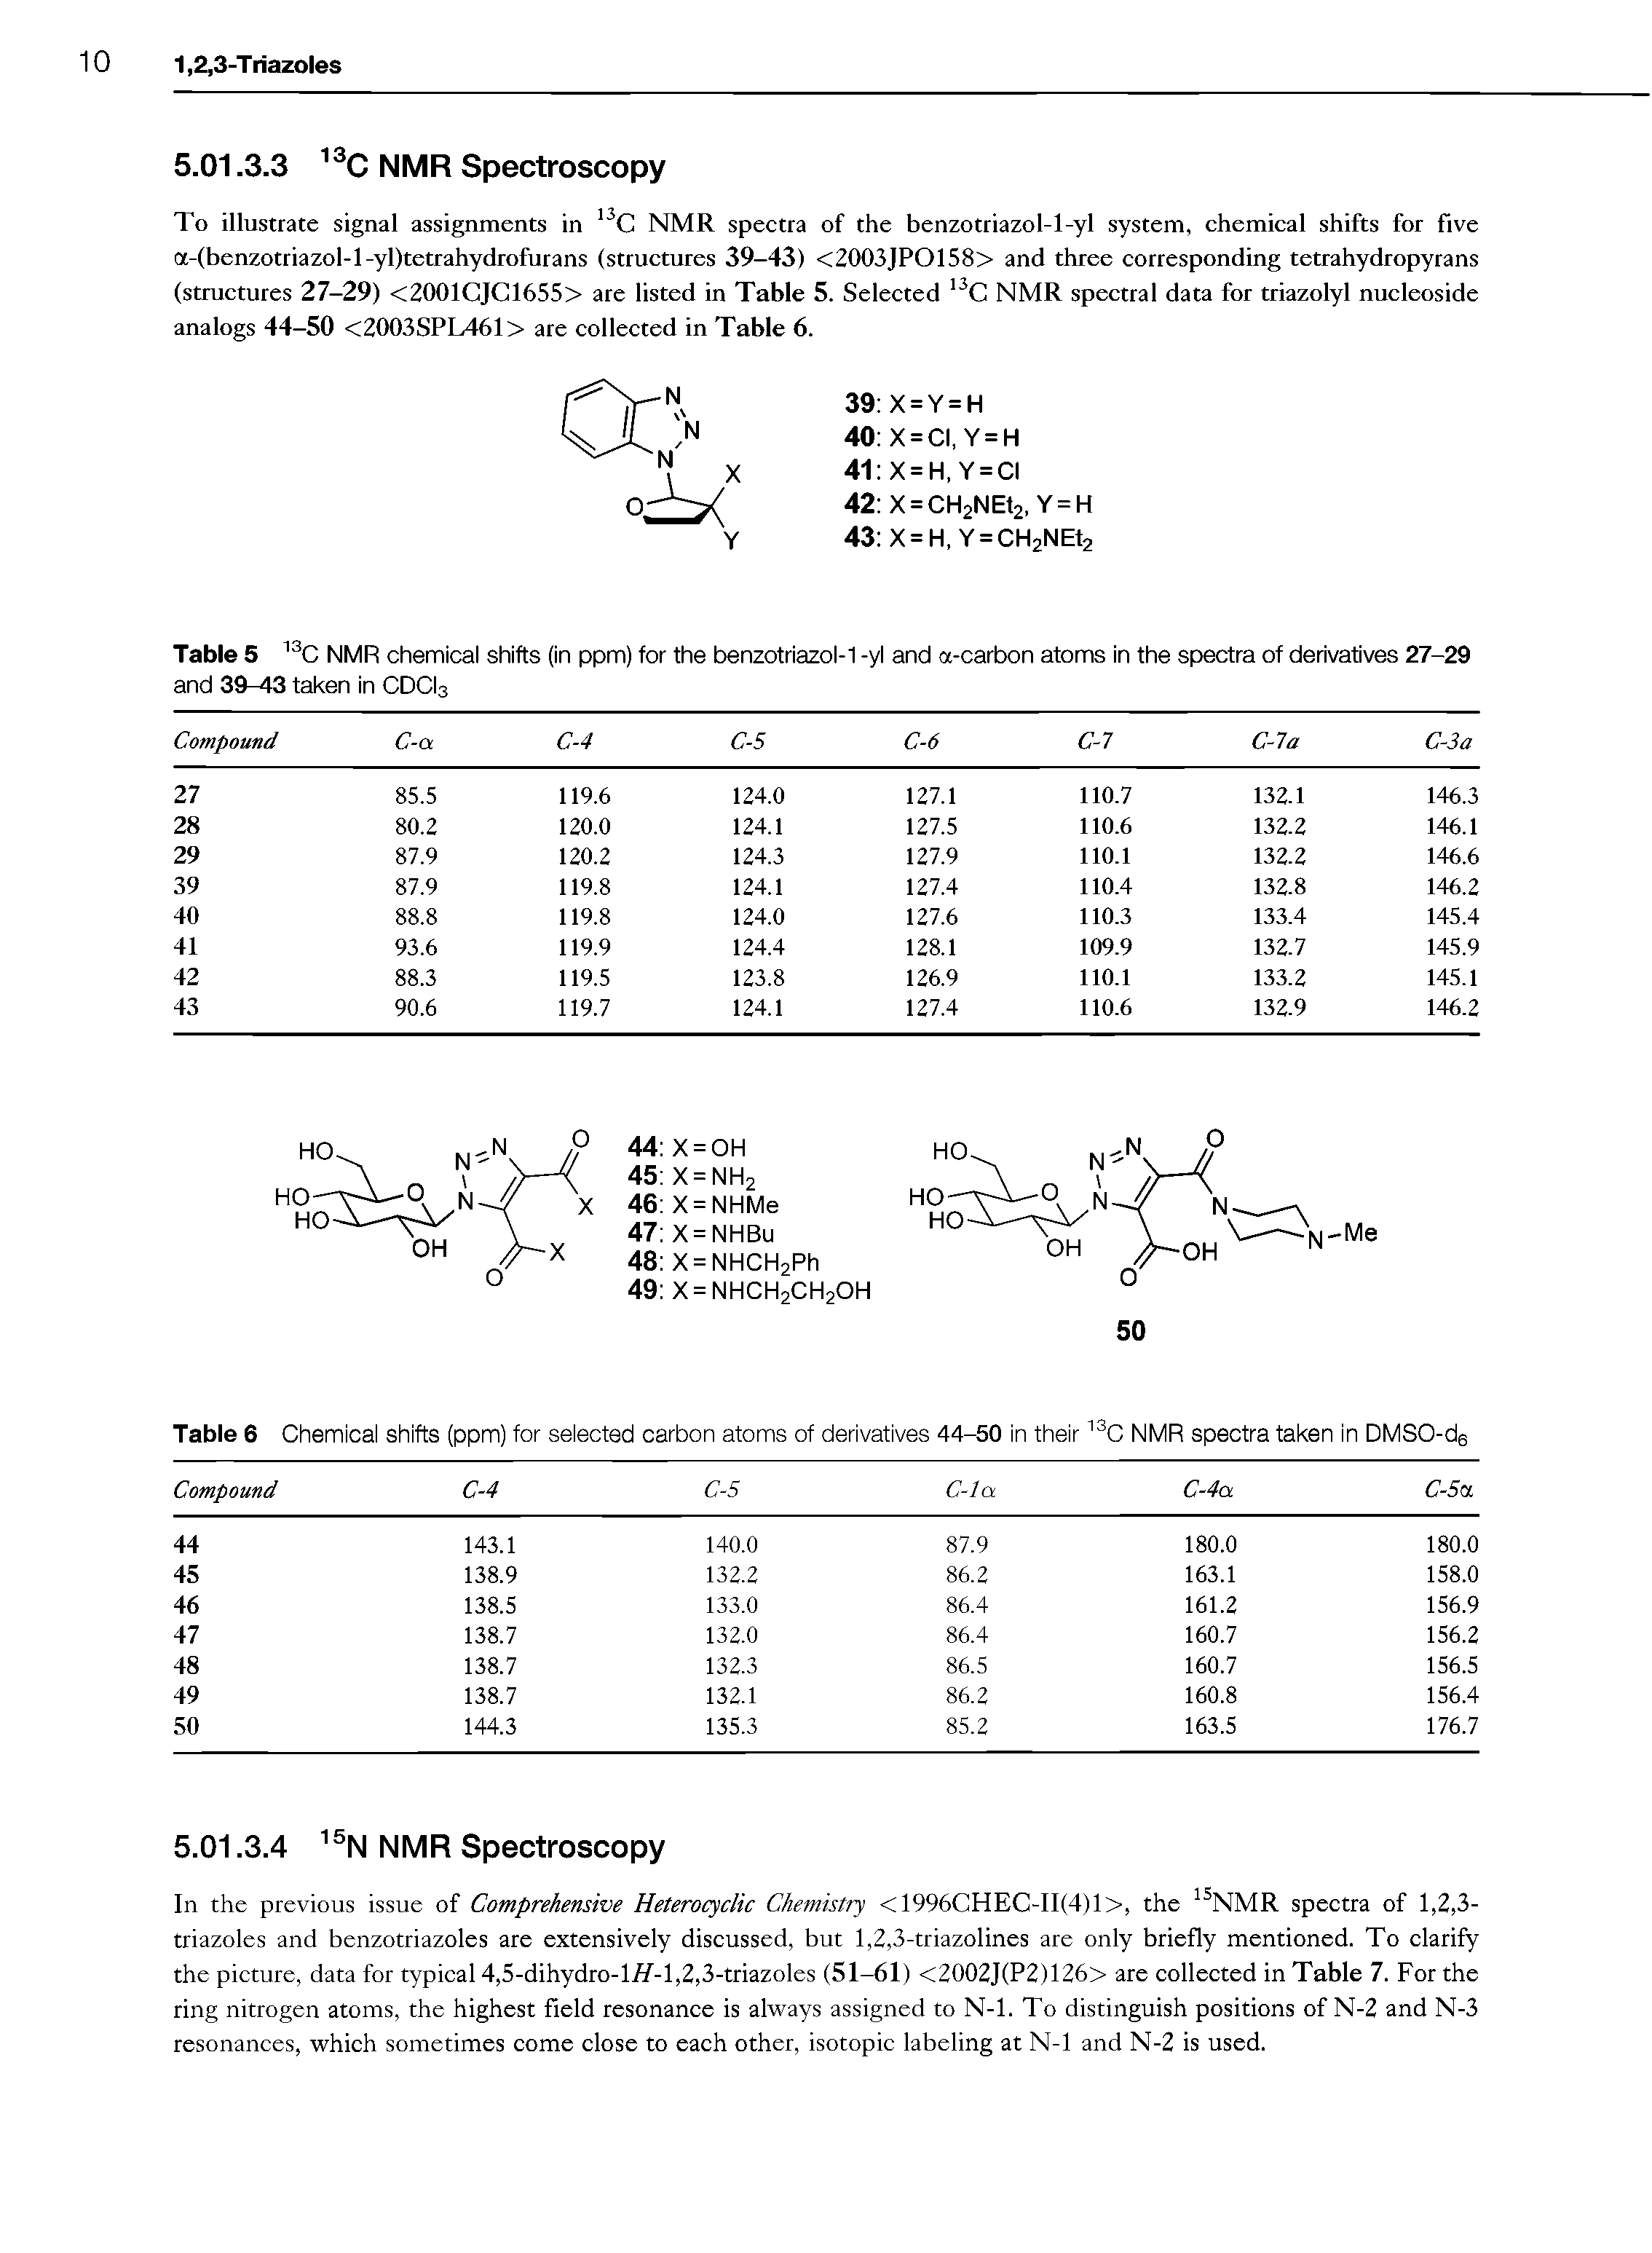 Table 5 13C NMR chemical shifts (in ppm) for the benzotriazol-1 -yl and a-carbon atoms in the spectra of derivatives 27-29 and 39-43 taken in CDCI3...